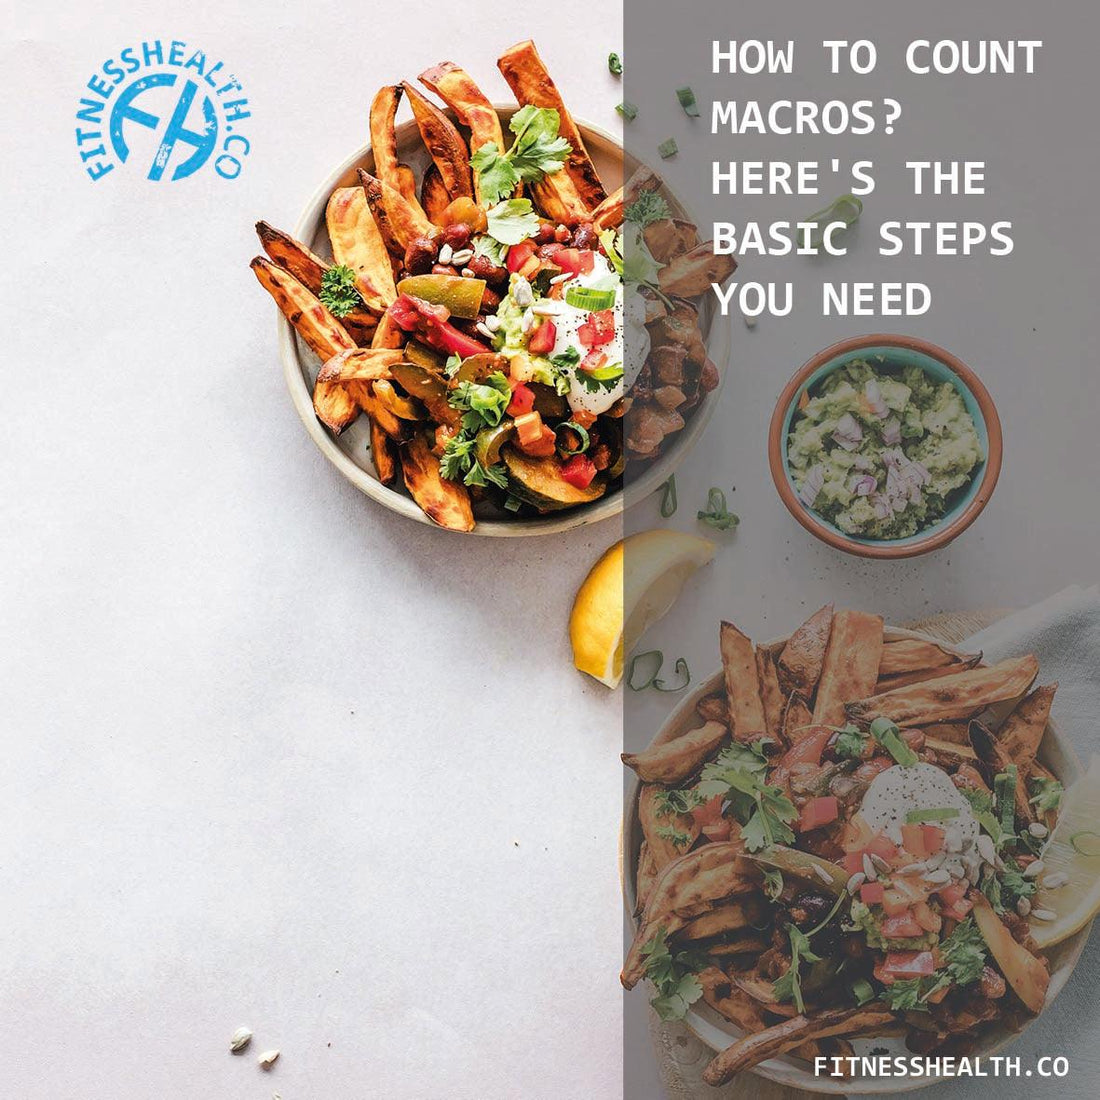 HOW TO COUNT MACROS? HERE'S THE BASIC STEPS YOU NEED - Fitness Health 